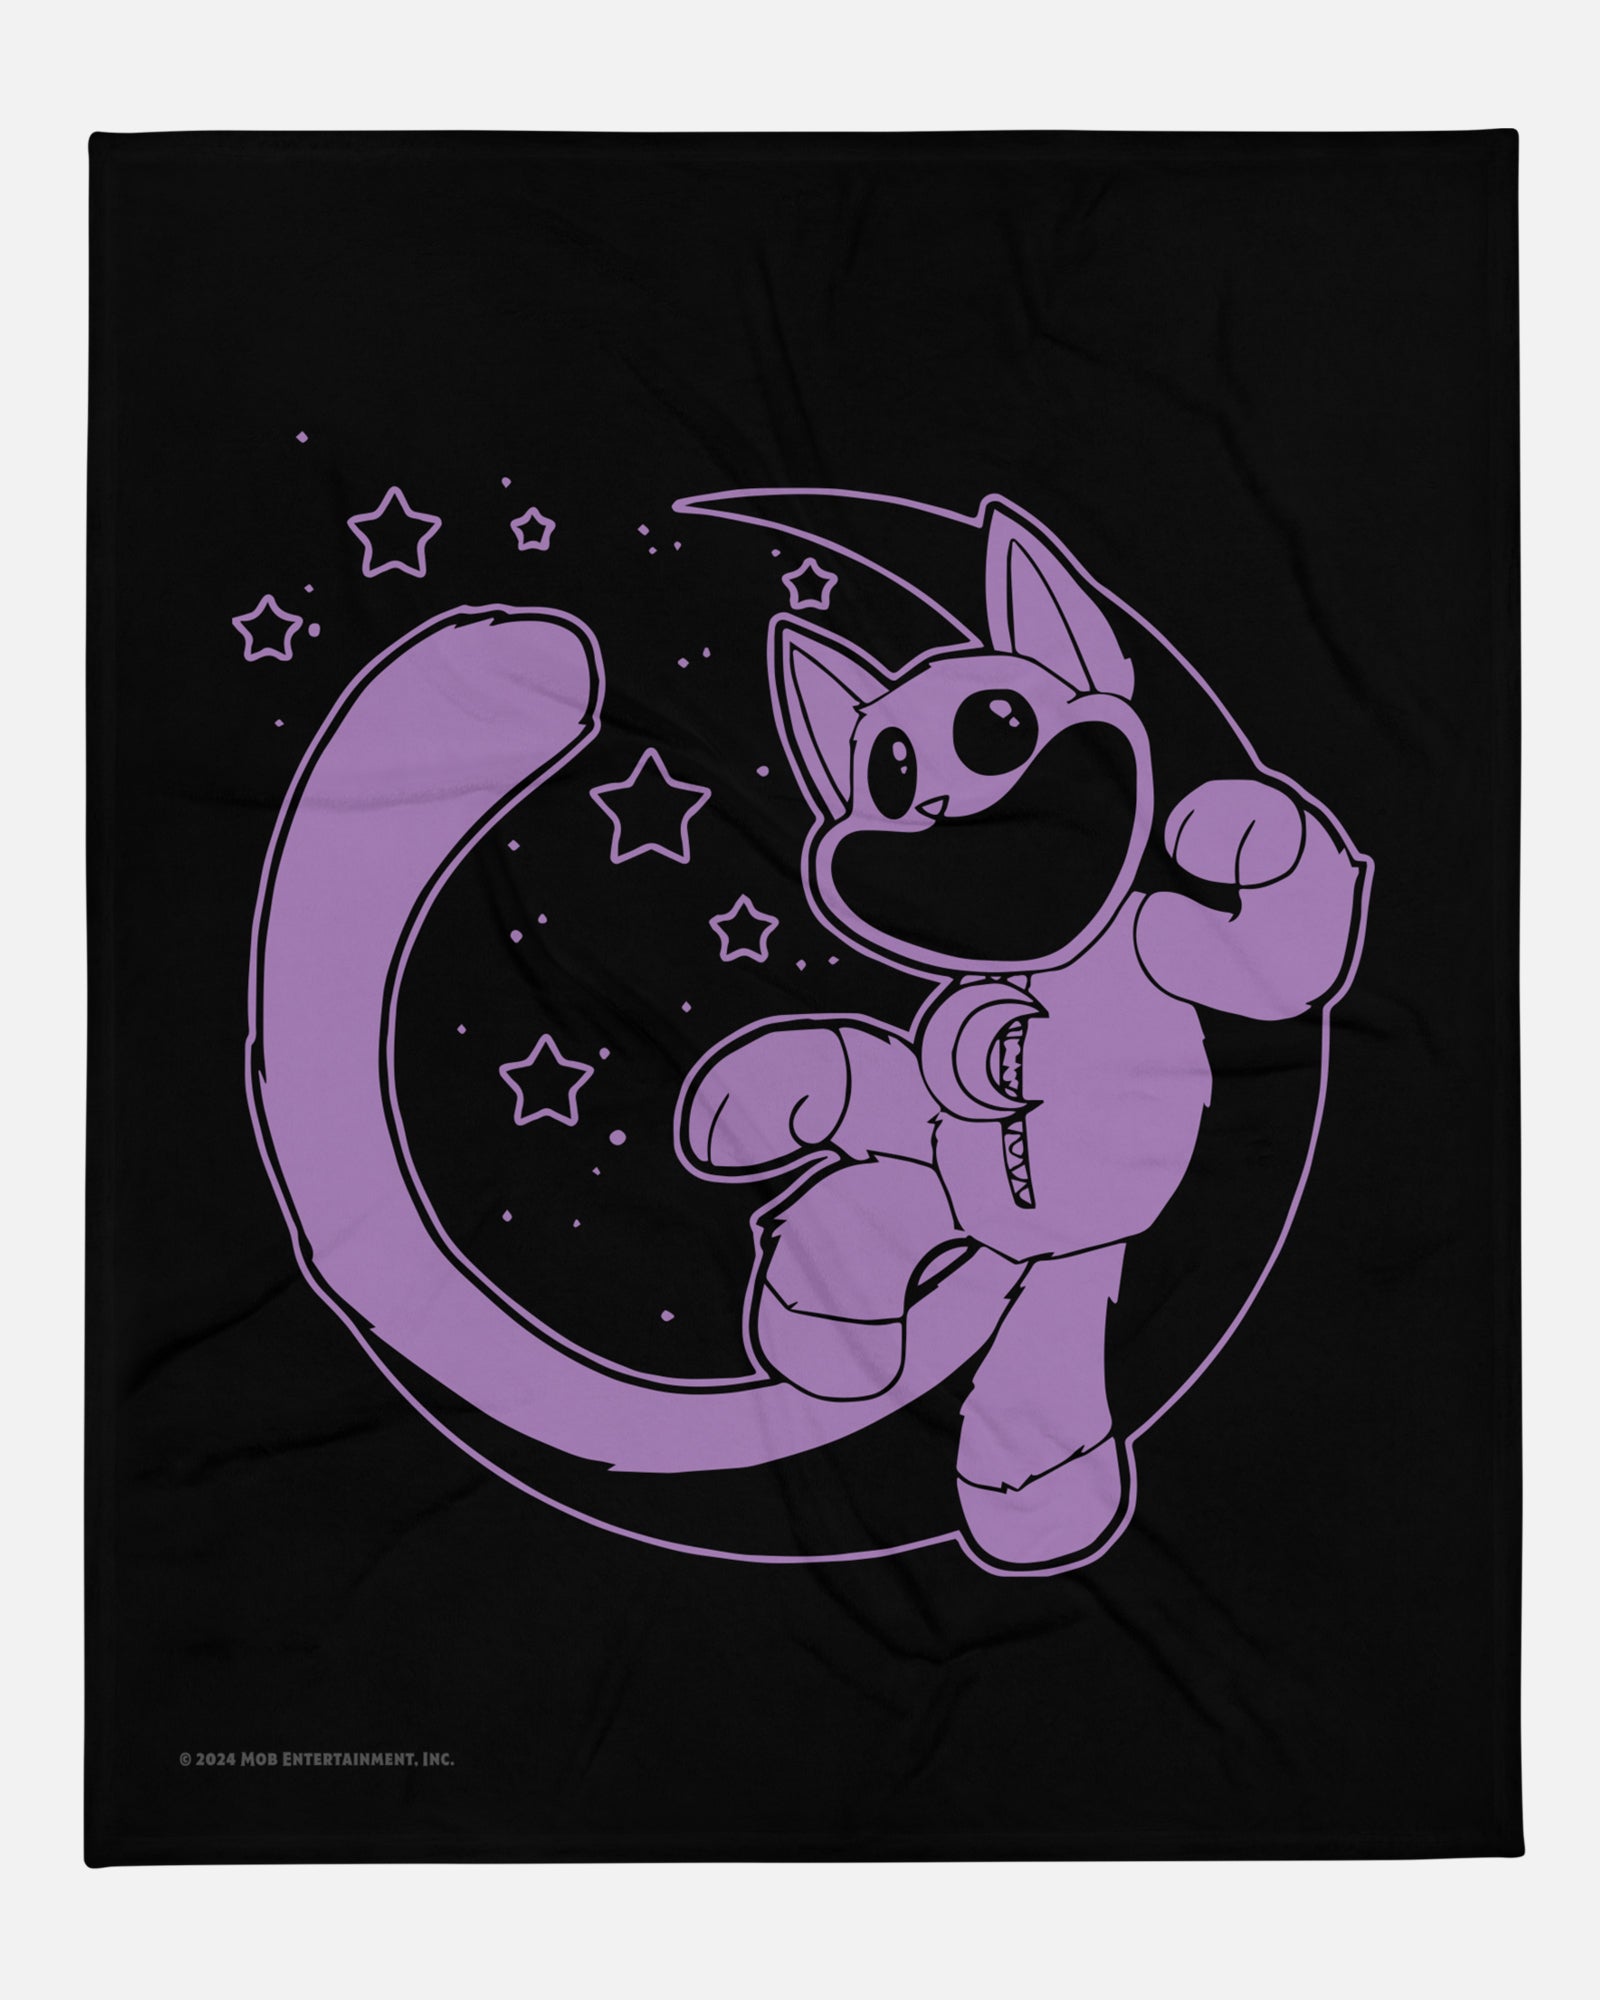 catnap moon black throw blanket. image: catnap sitting on moon with stars in backgrond.